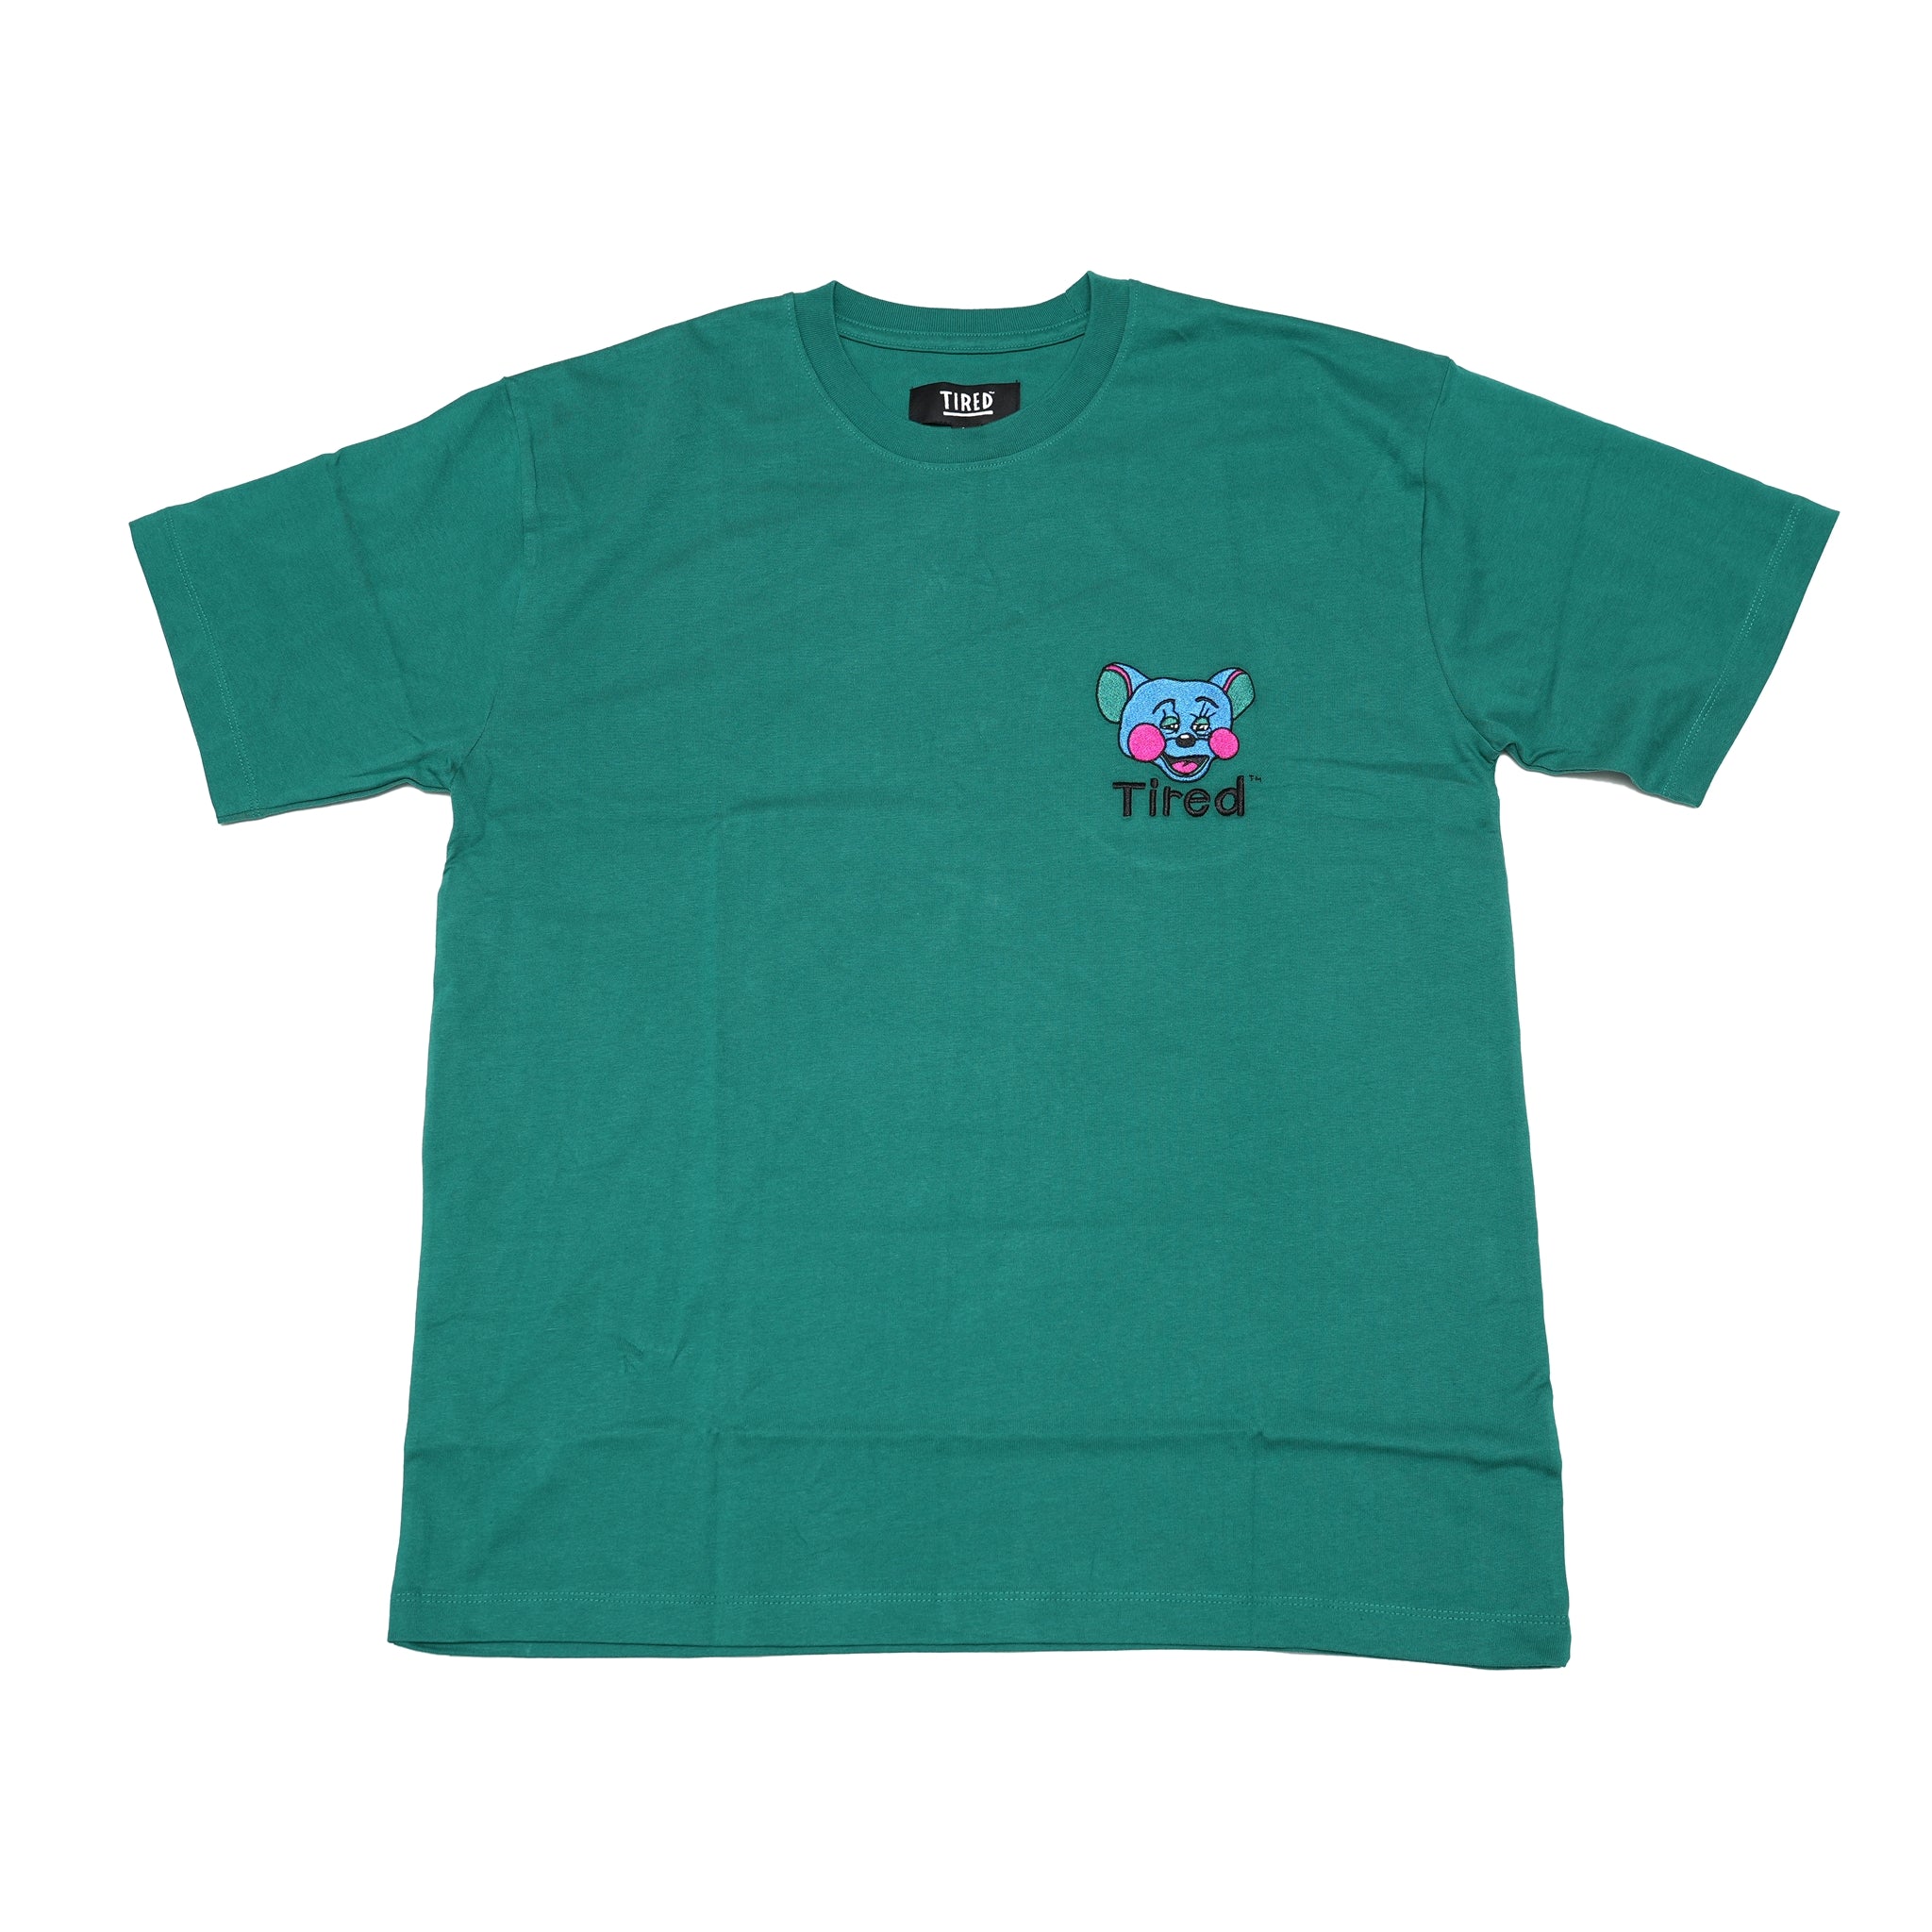 No:TS00181 | Name:TIPSY MOUSE EMBROIDERED SS TEE | Color:Kelly Green【TIRED_タイレッド】【ネコポス選択可能】